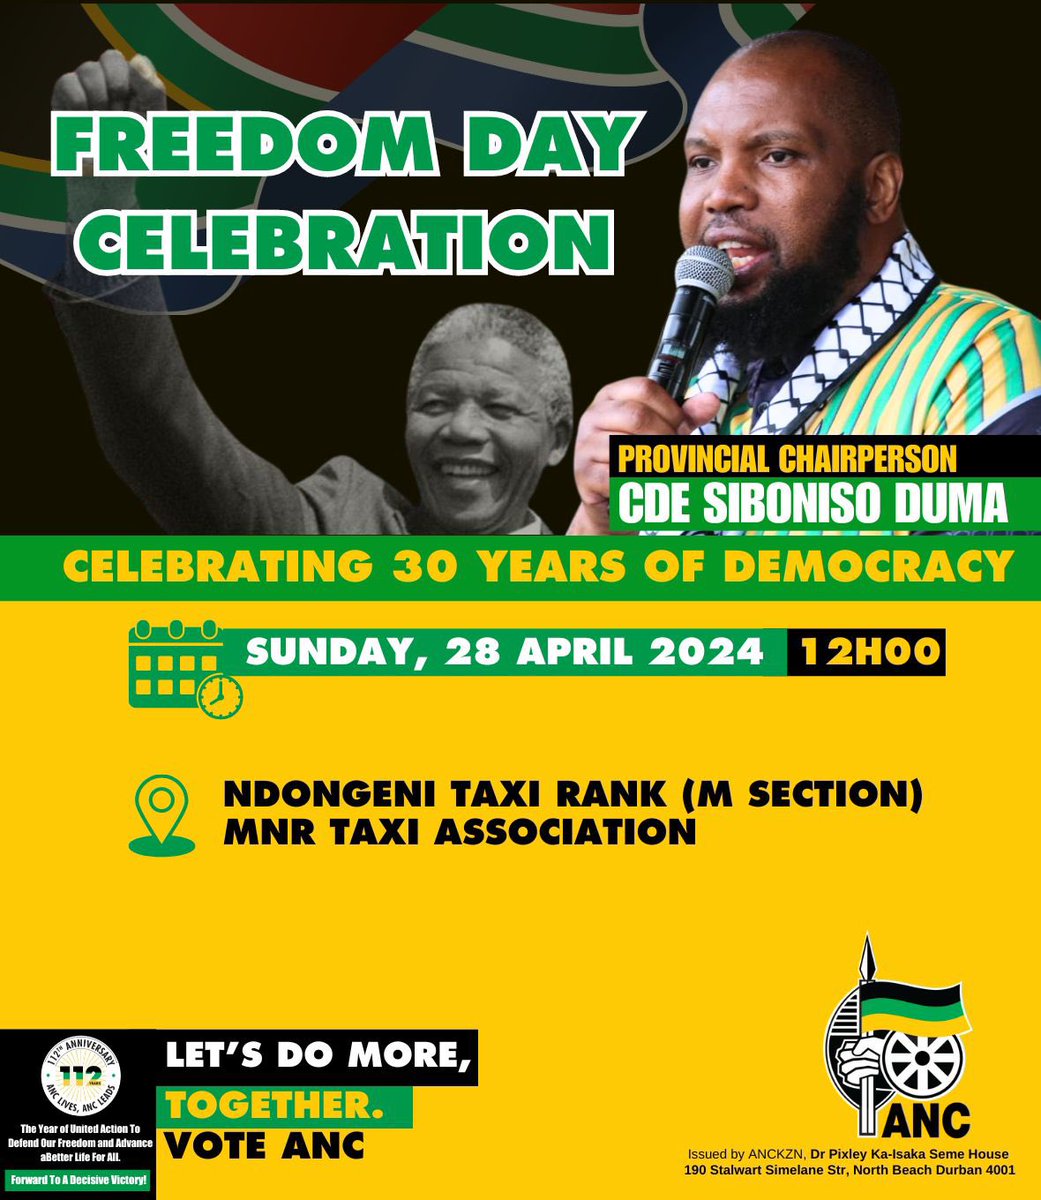 MEDIA ALERT New Venue for the Freedom Day Rally in Umlazi 28 April 2024 Dr Pixley ka Isaka Seme House: Please be advised that the location for today ANC KwaZulu Natal Freedom Day celebration originally scheduled atMenzi Sports Ground has been changed. The new venue details